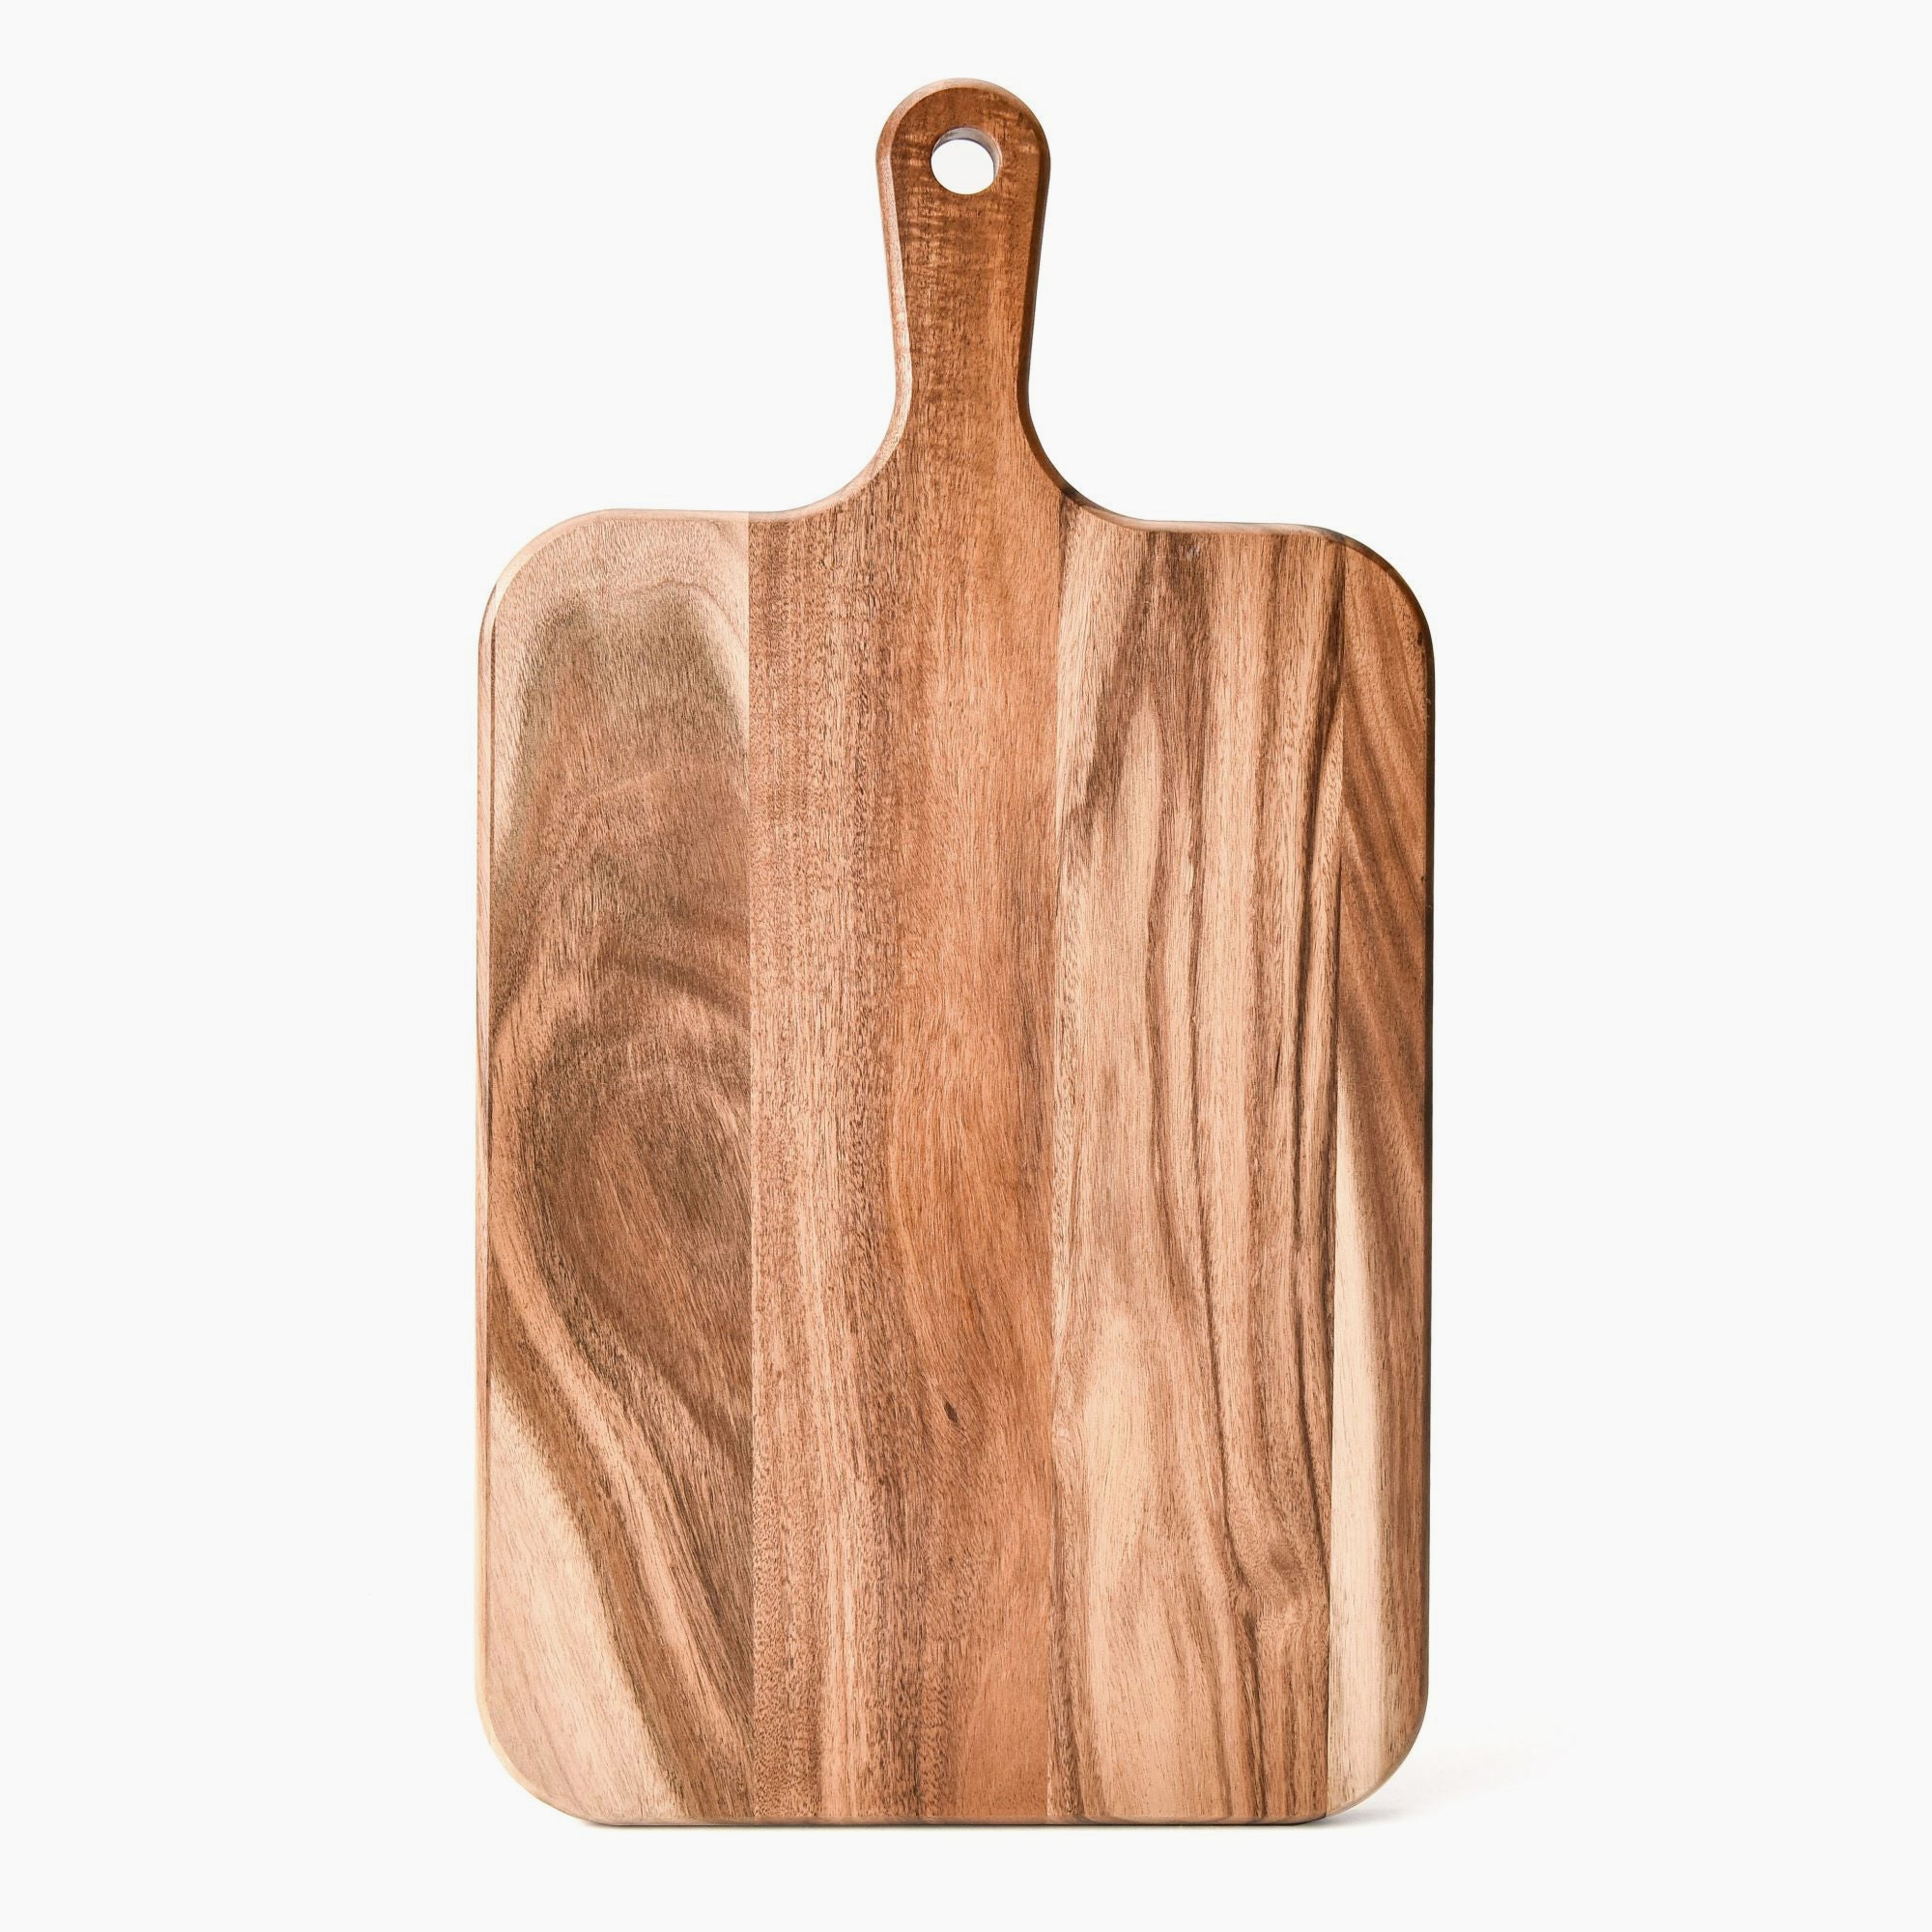 Acacia Wood Cutting Board Large Charcuterie Board Serving Tray w/ Handle